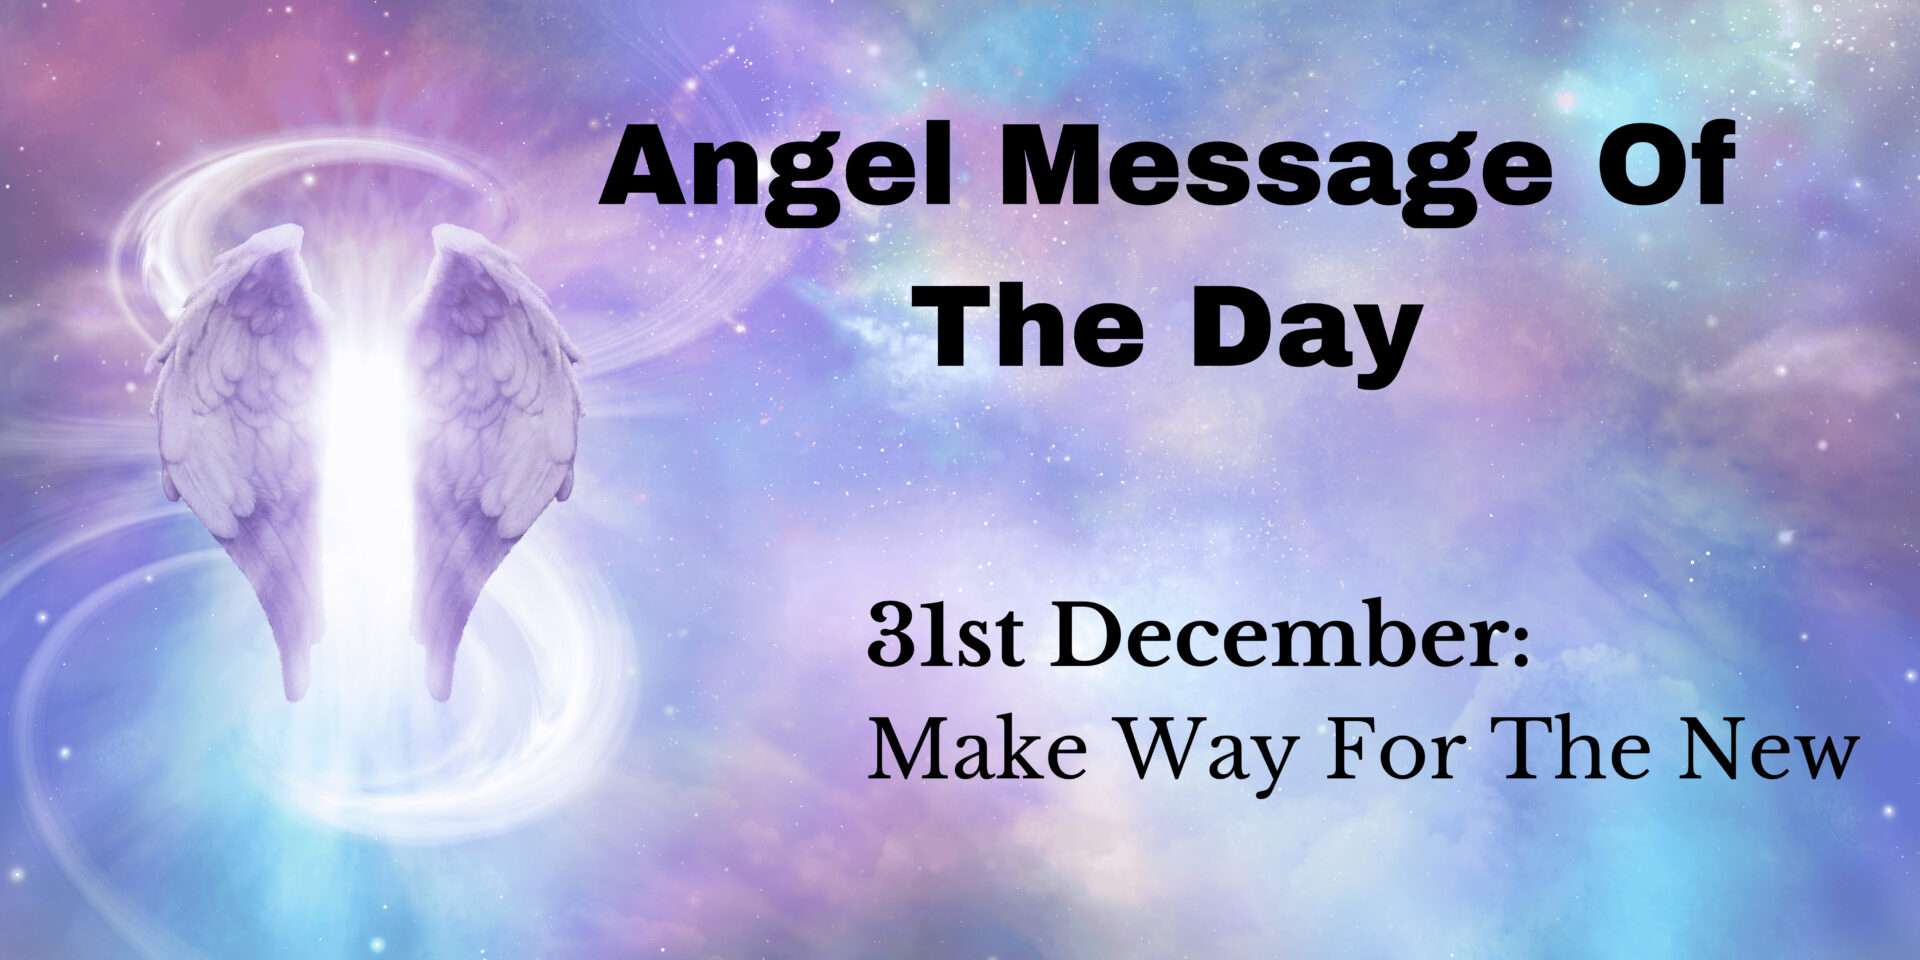 angel message of the day : make way for the new